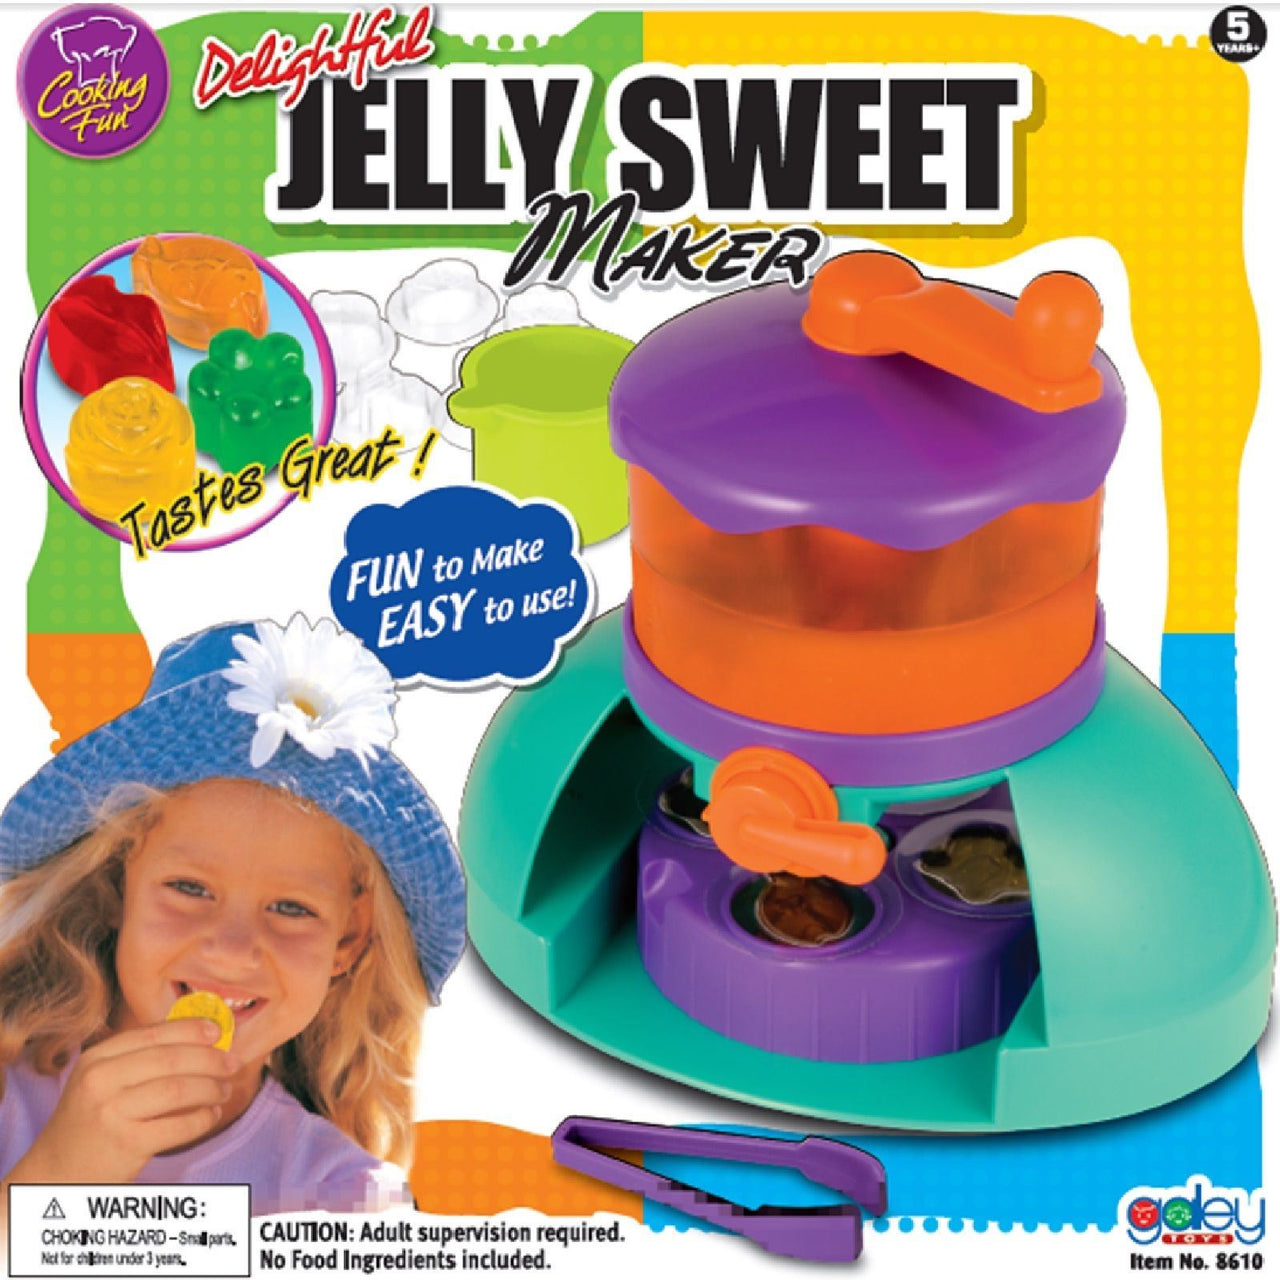 Galey Jelly Sweet Maker